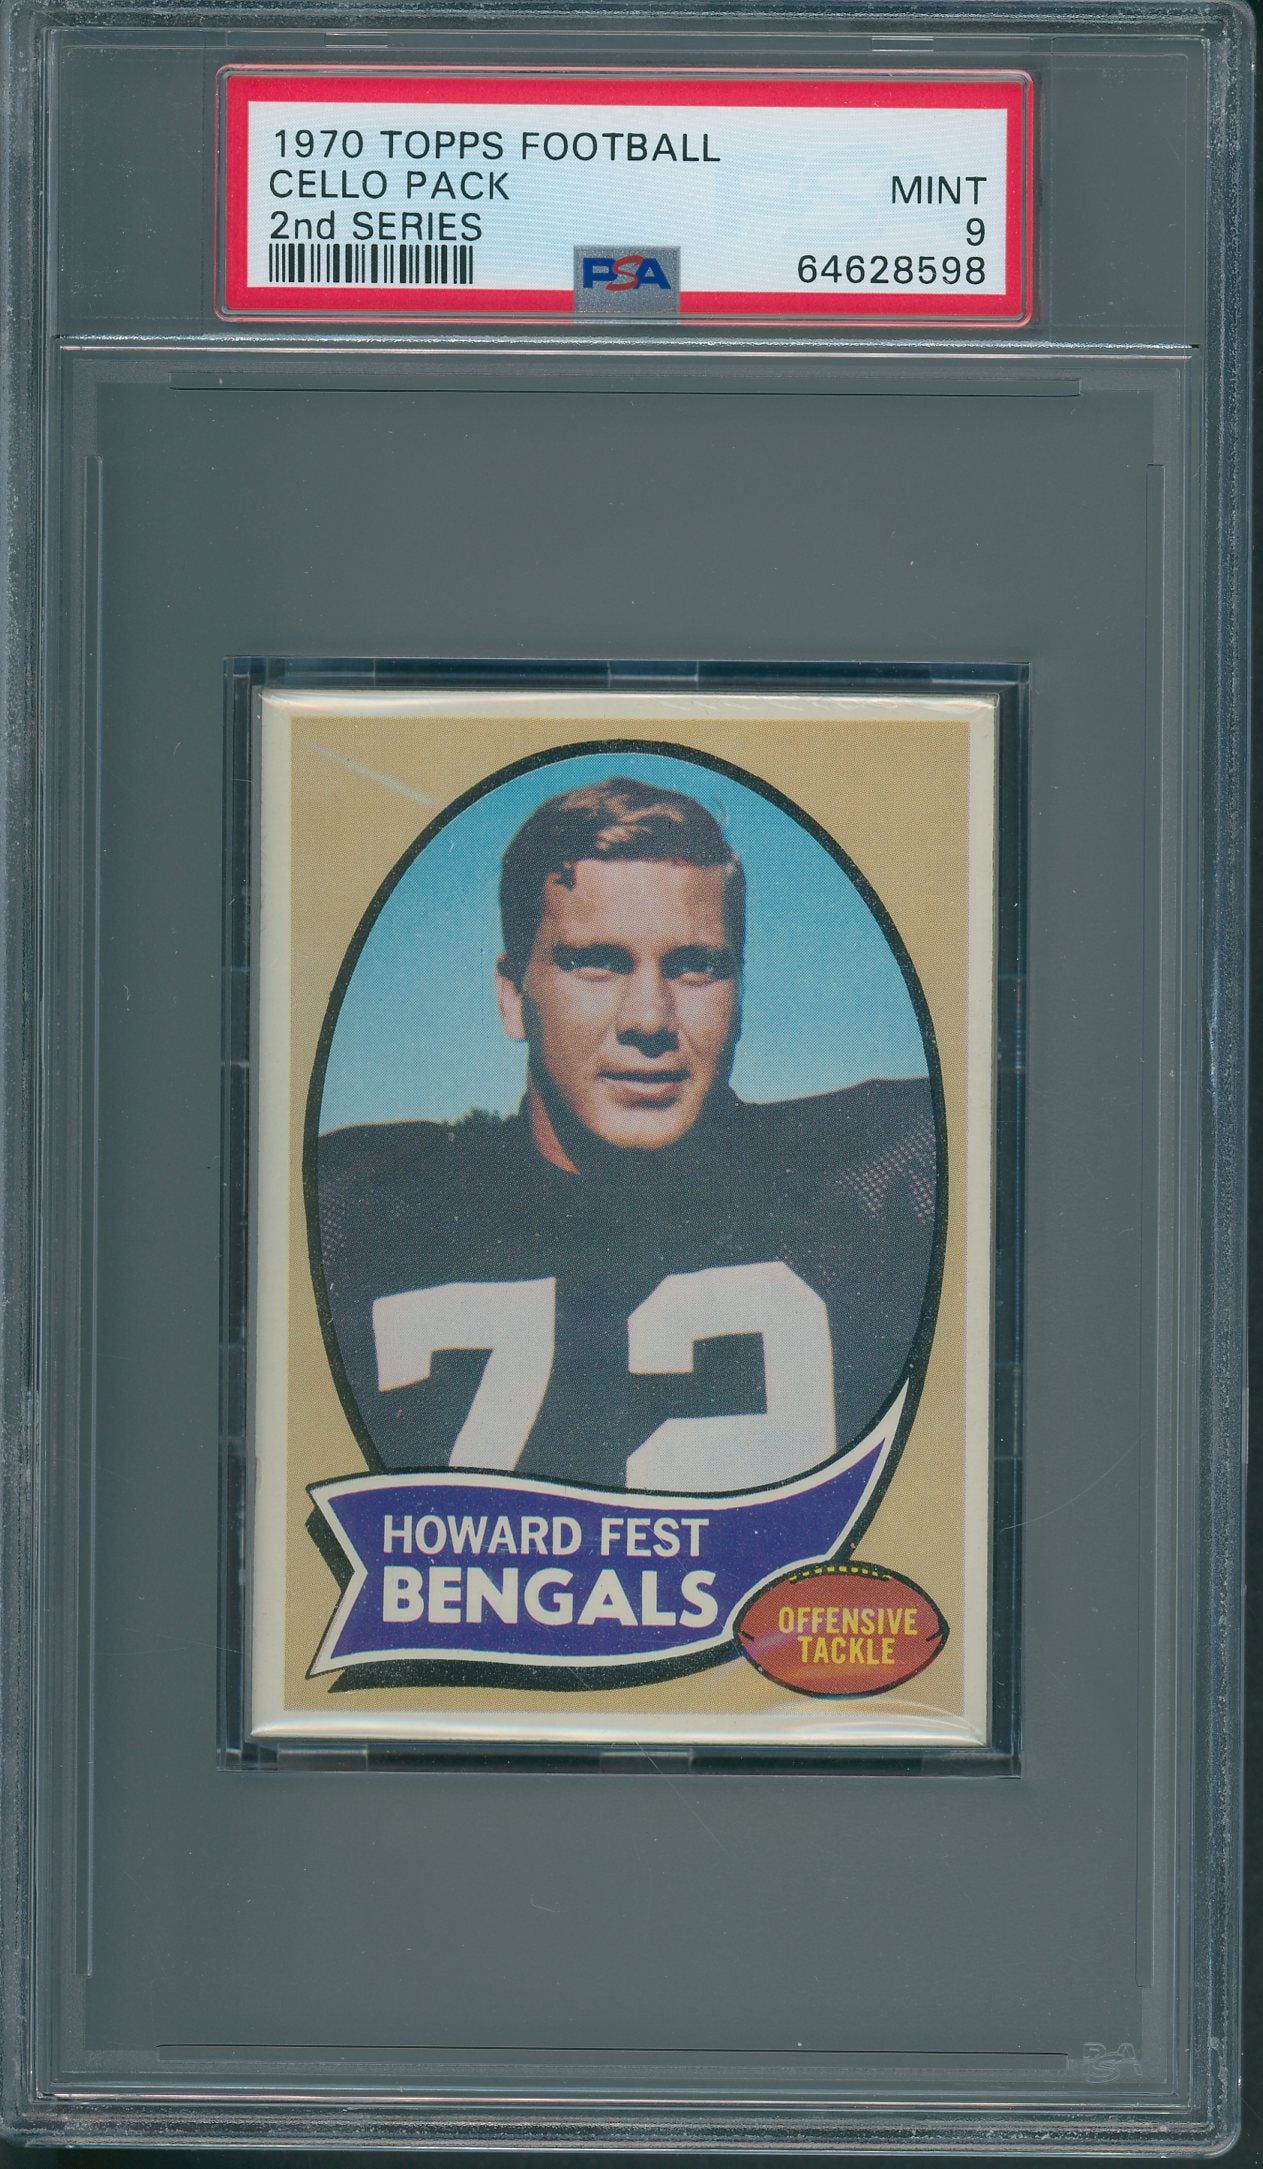 1970 Topps Football Unopened 2nd Series Cello Pack PSA 9 *8598